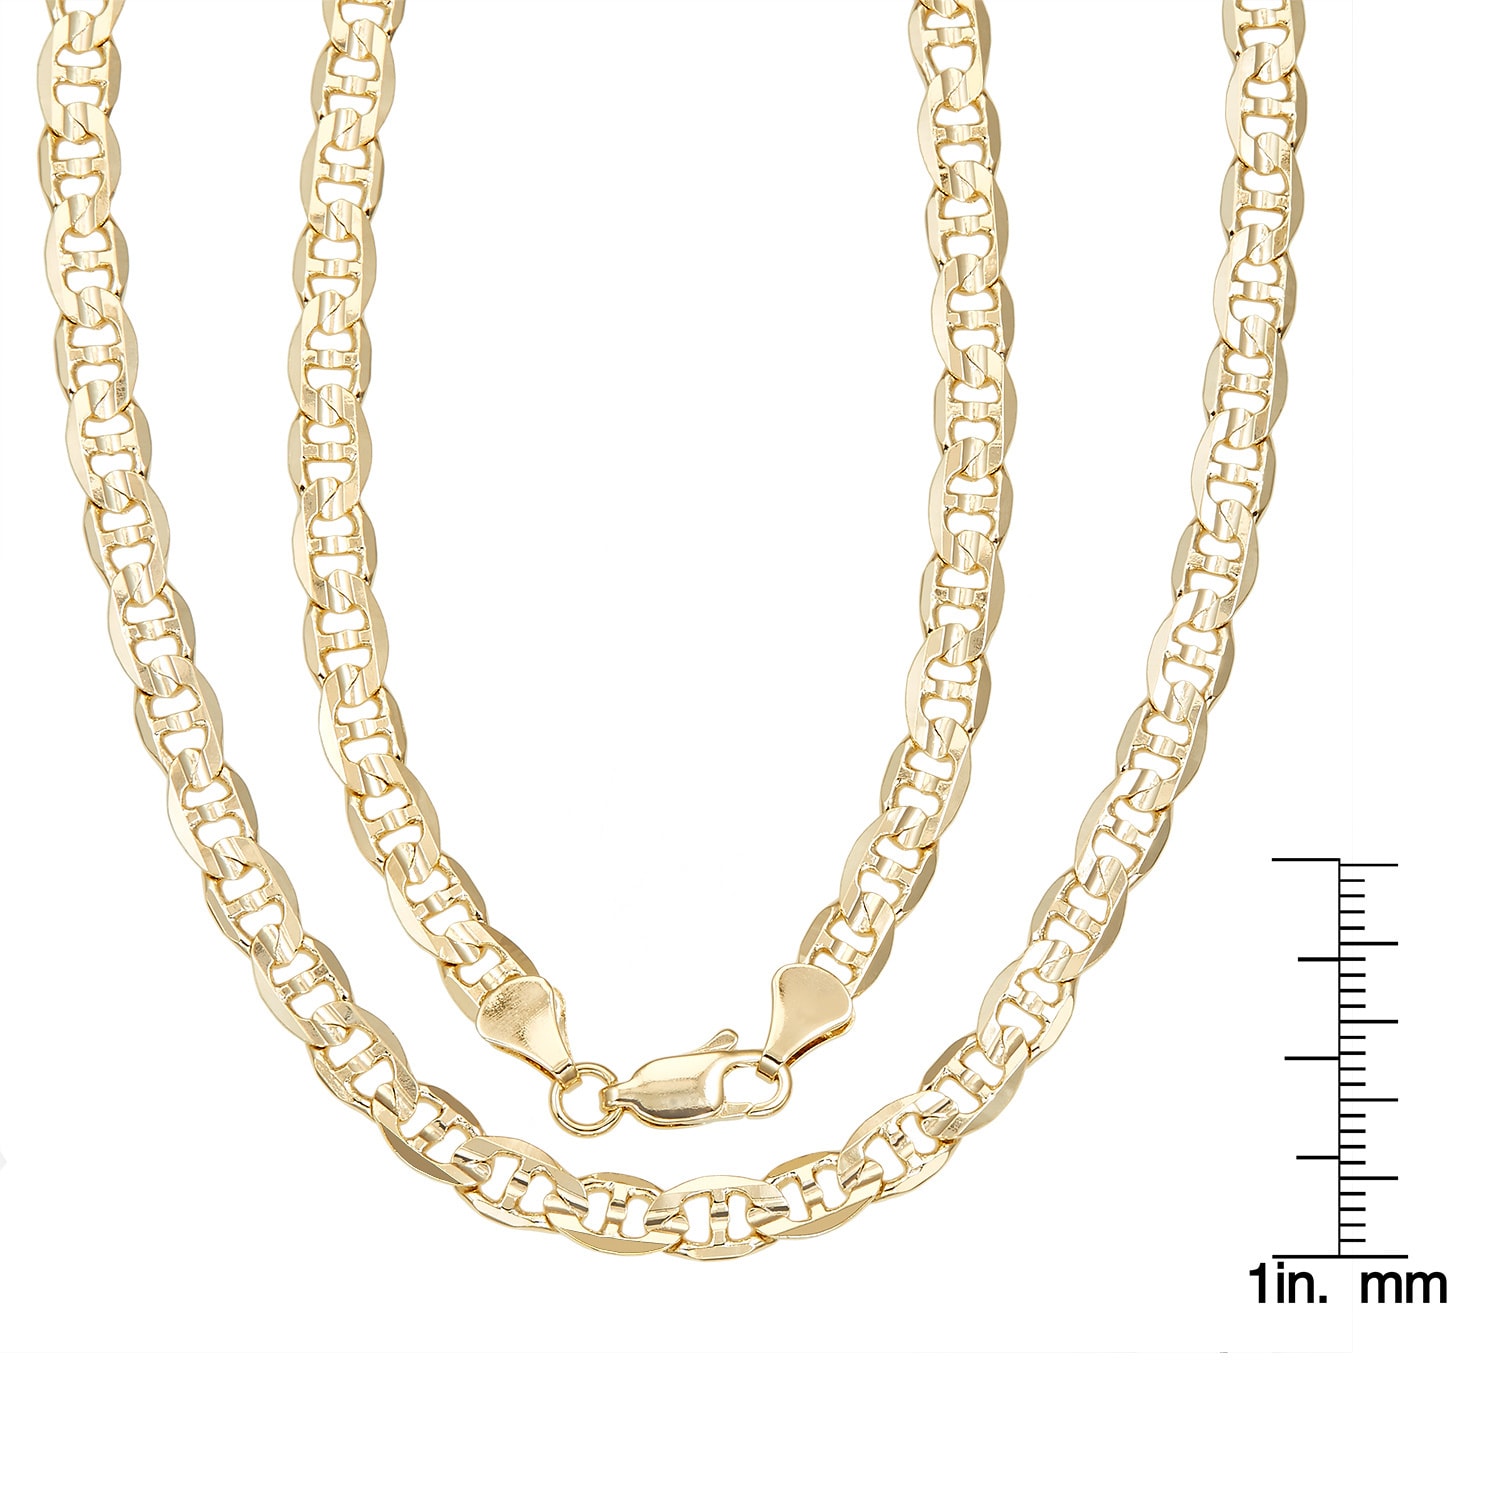 gucci gold chain necklace